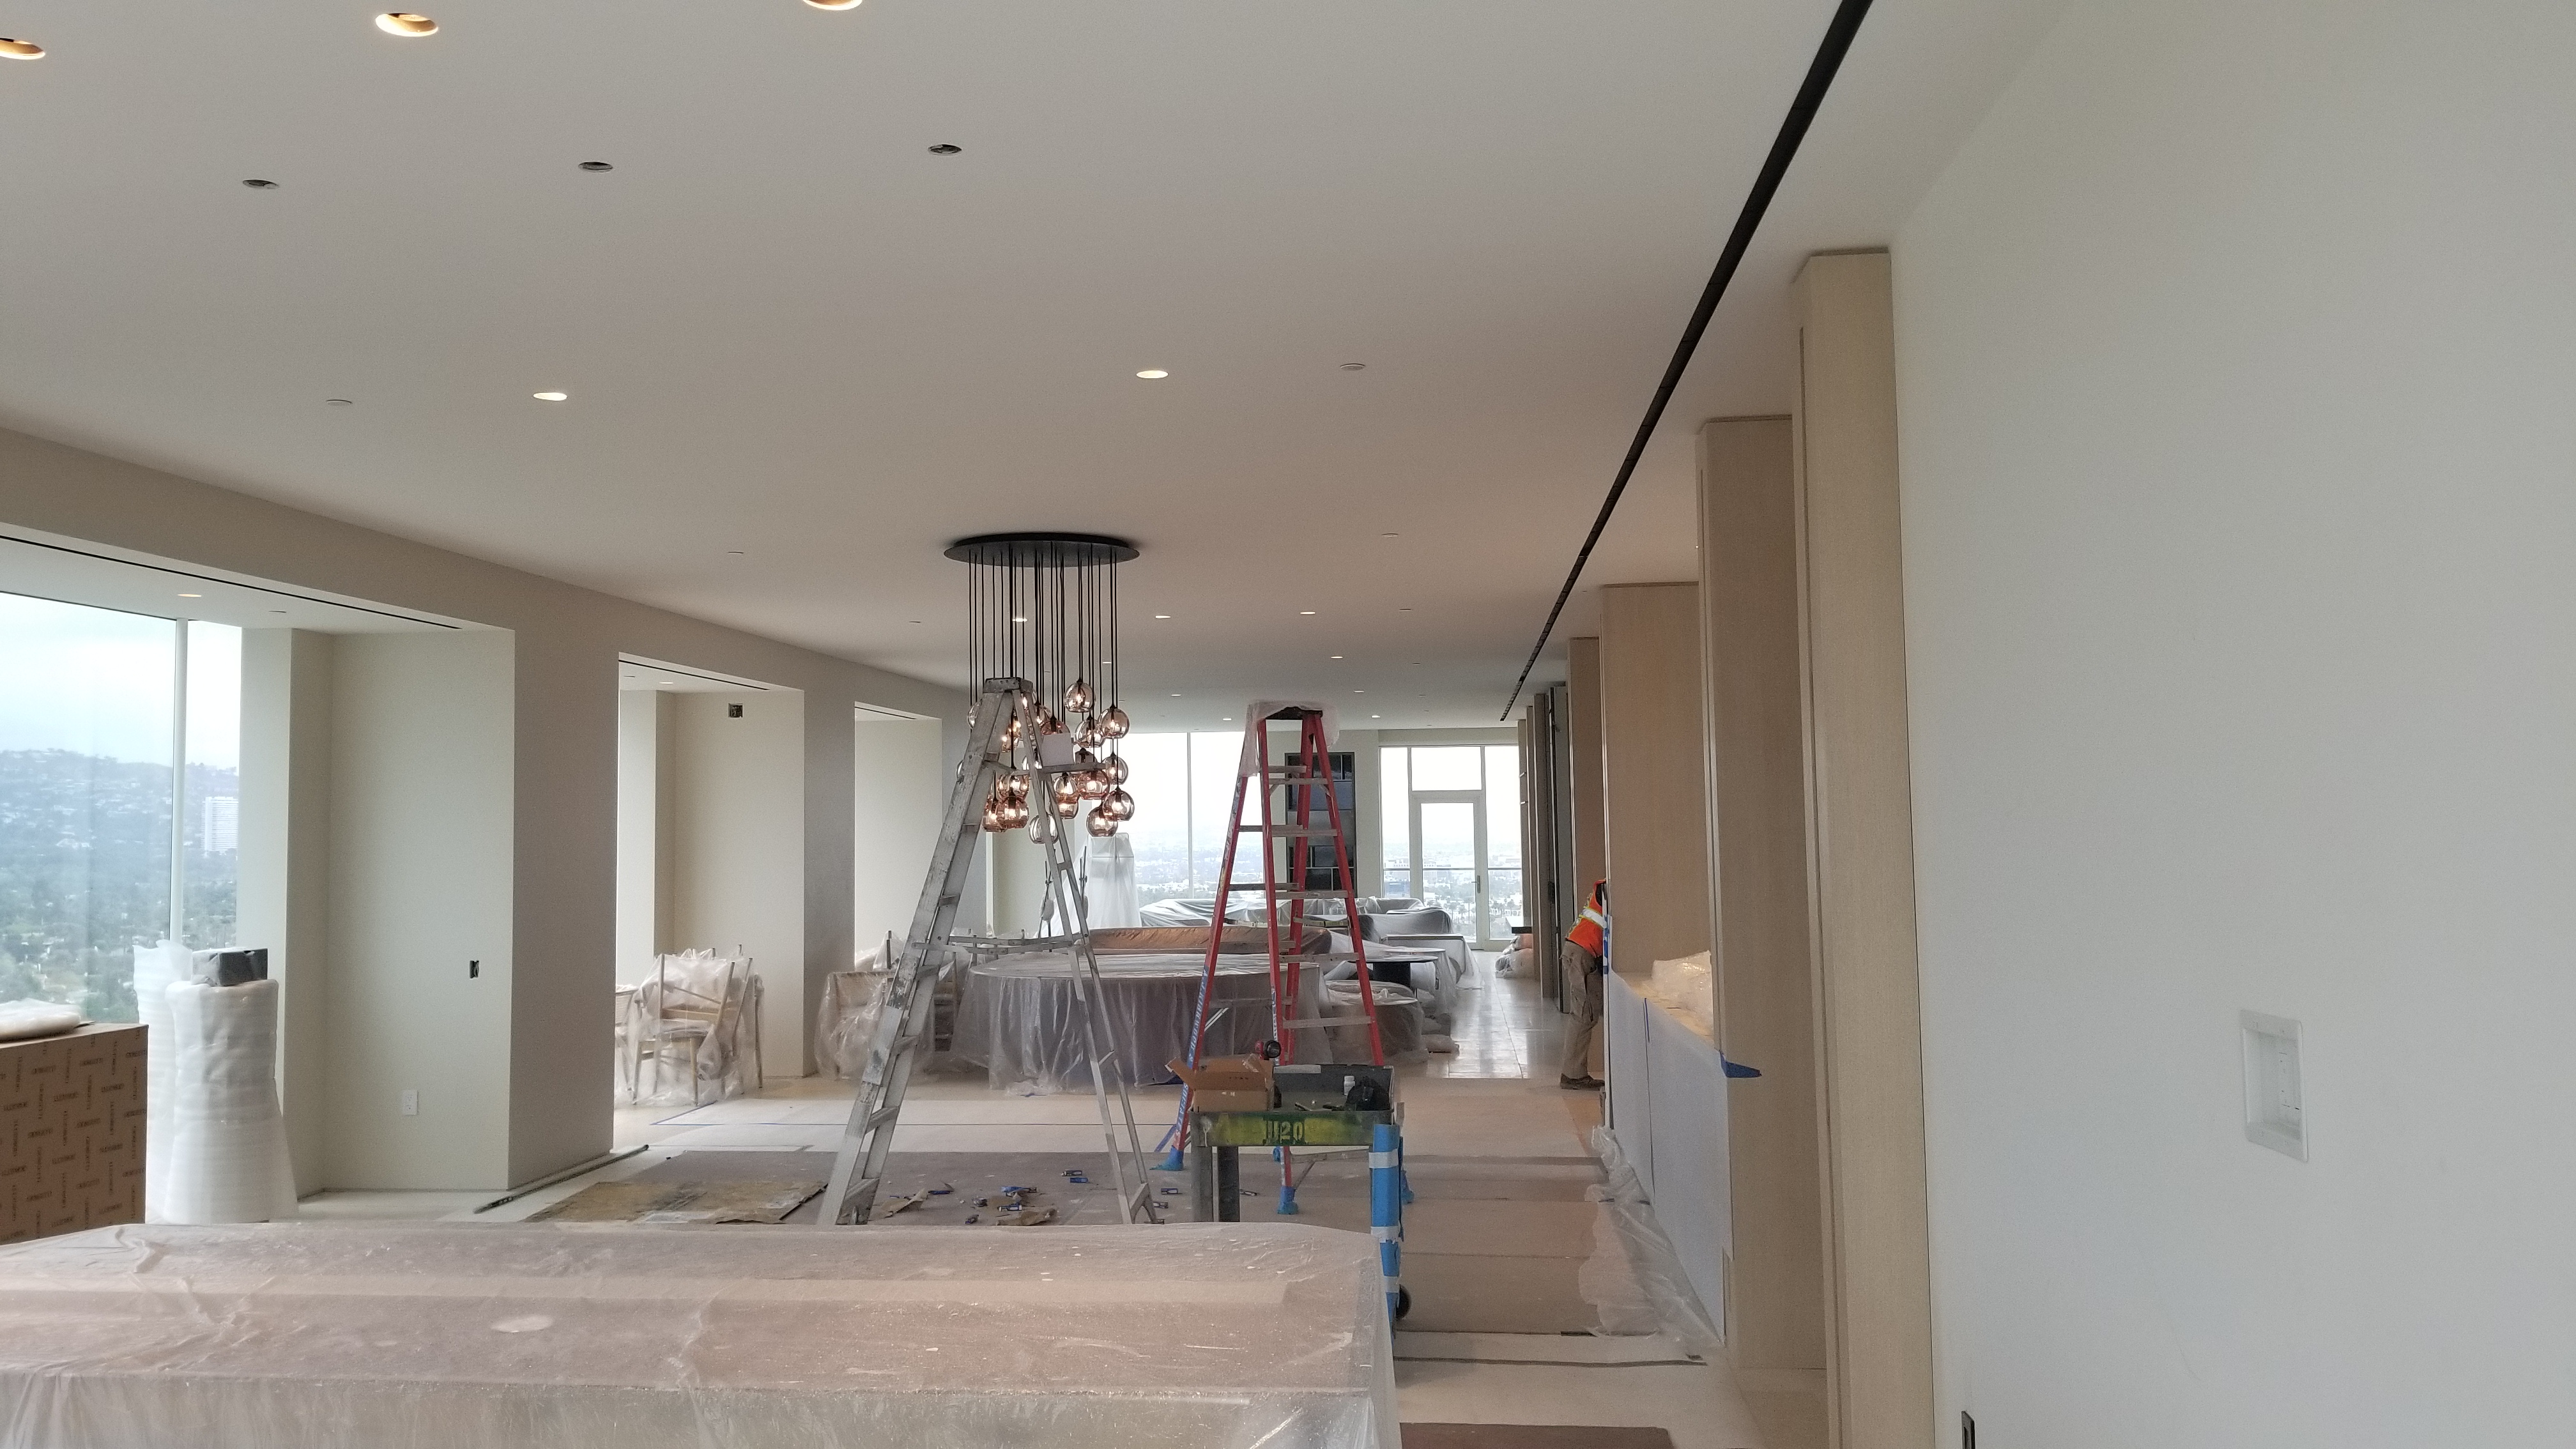 Image of Residential Drywall Construction, Sierra Drywall Inc